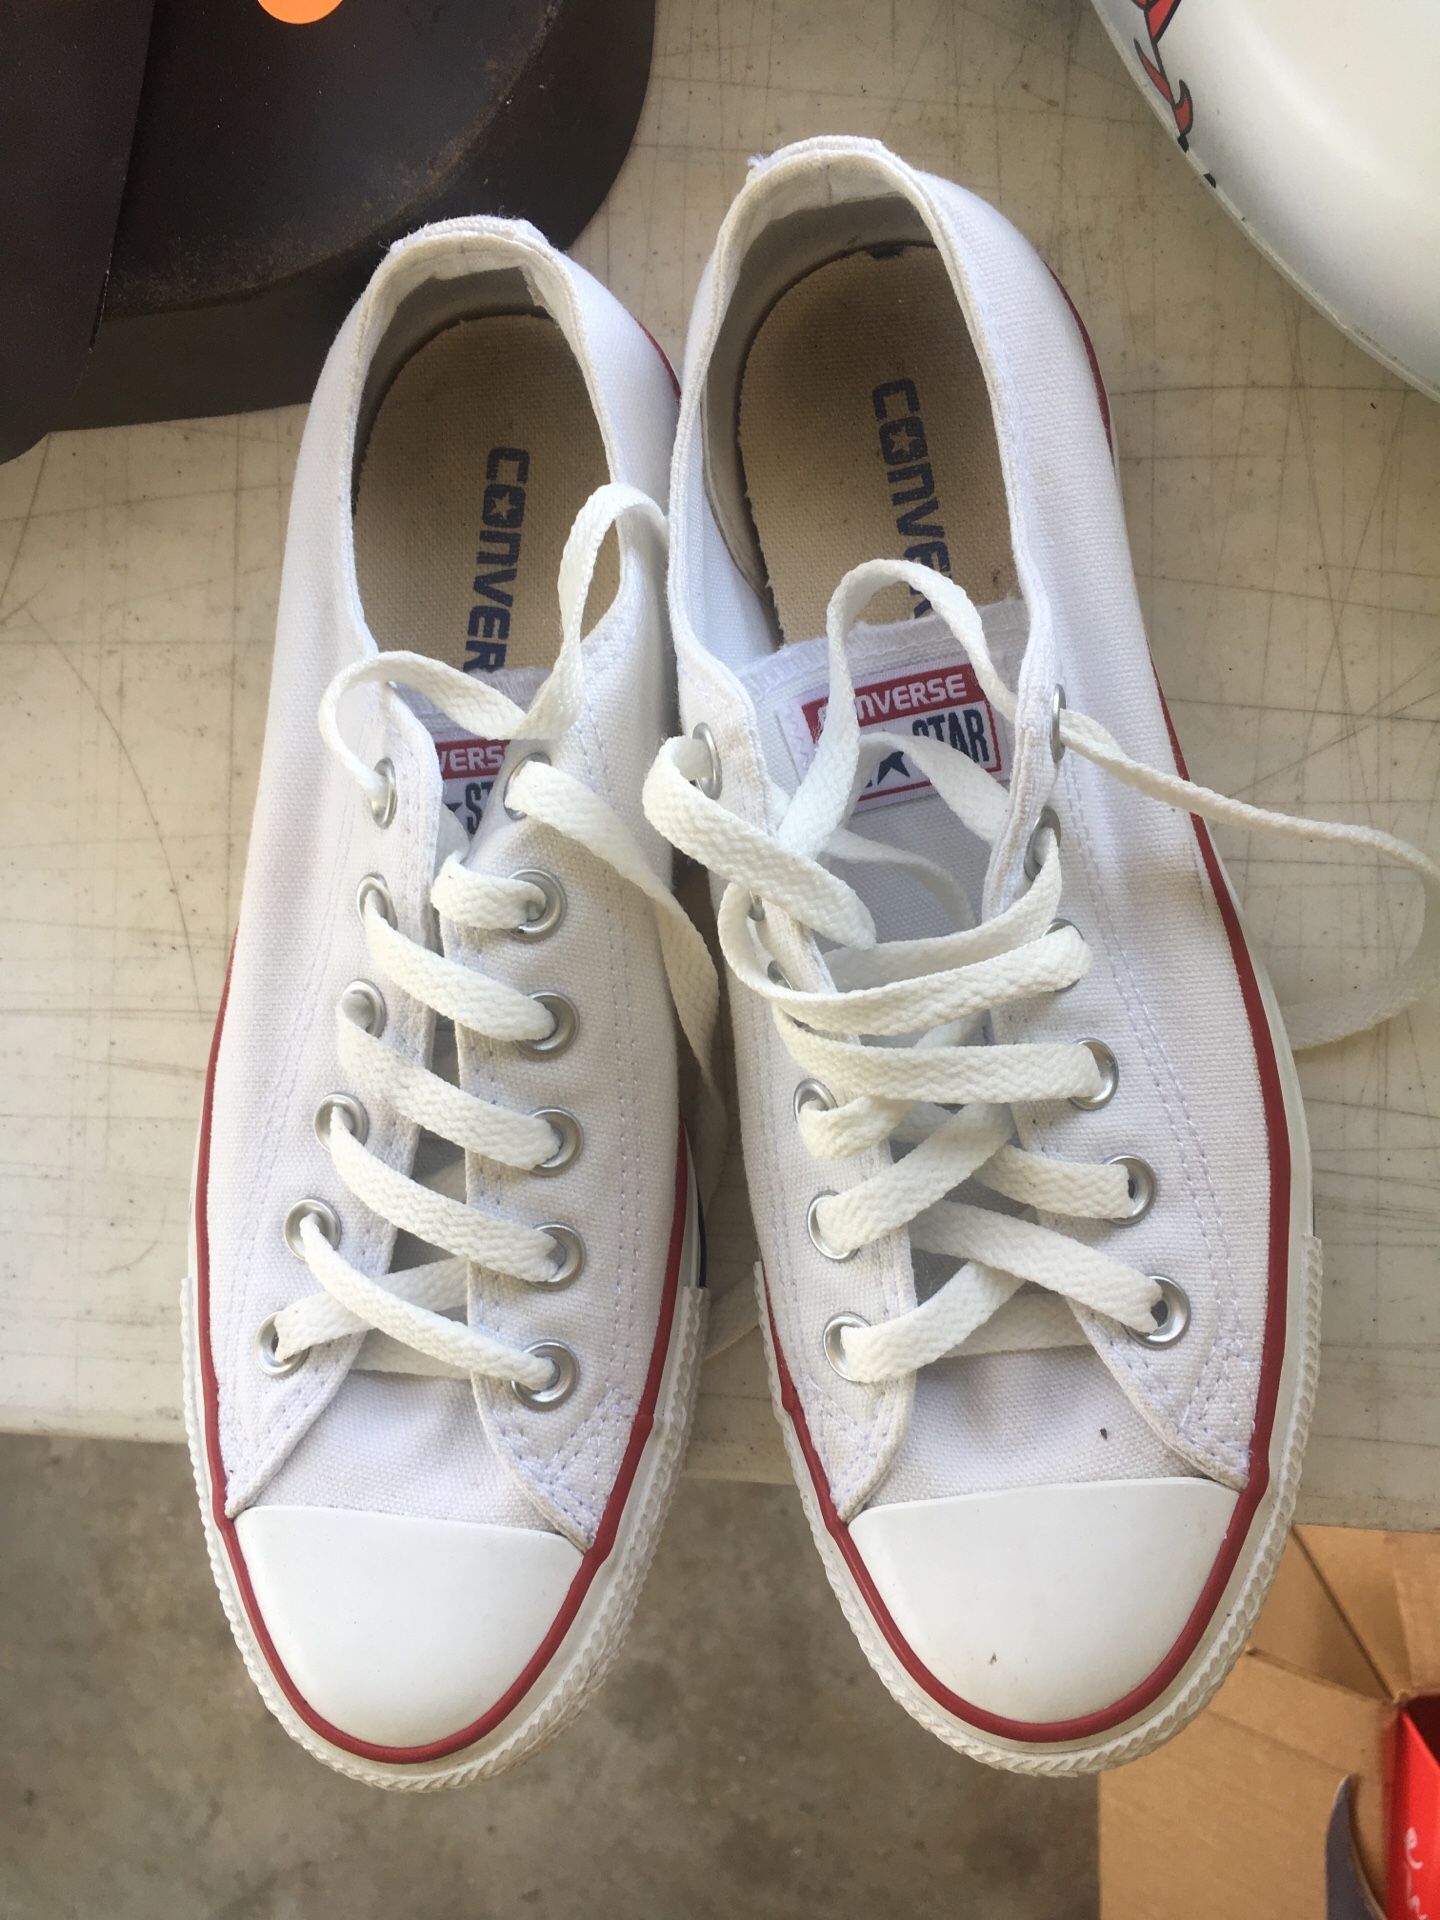 Converse All Star Size 8 in Women